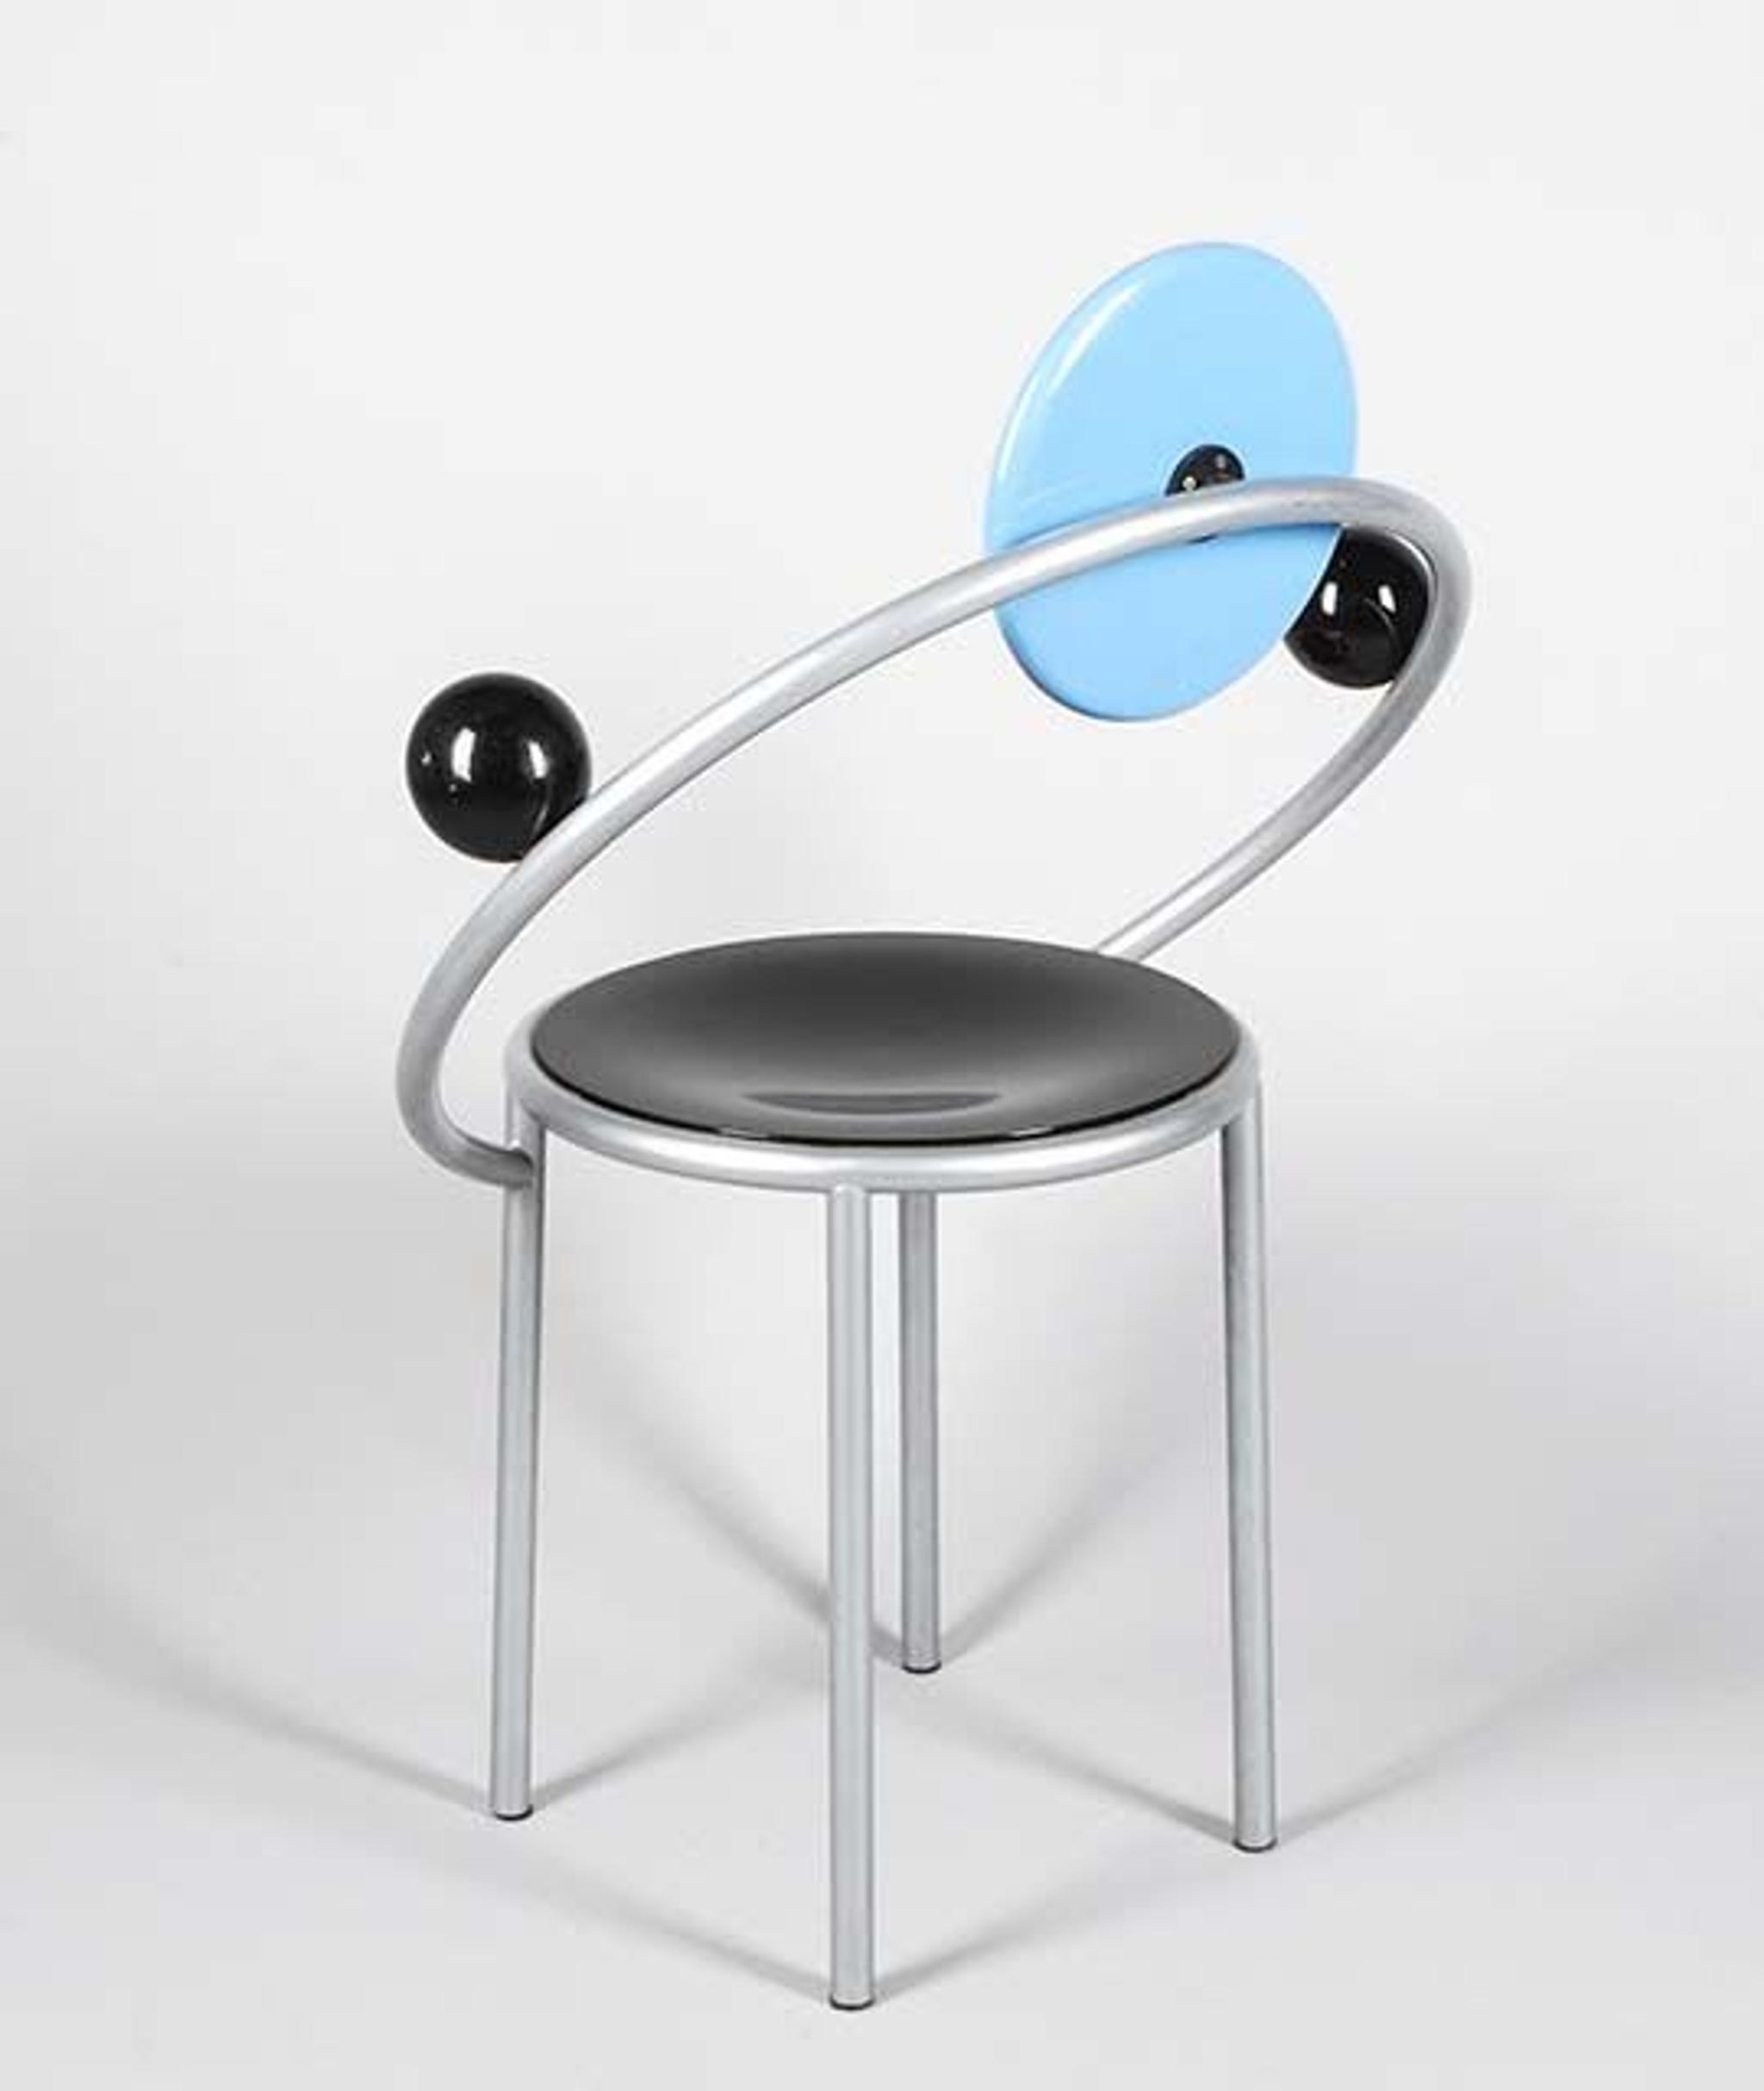 'First Chair' by Michele De Lucchi for Memphis